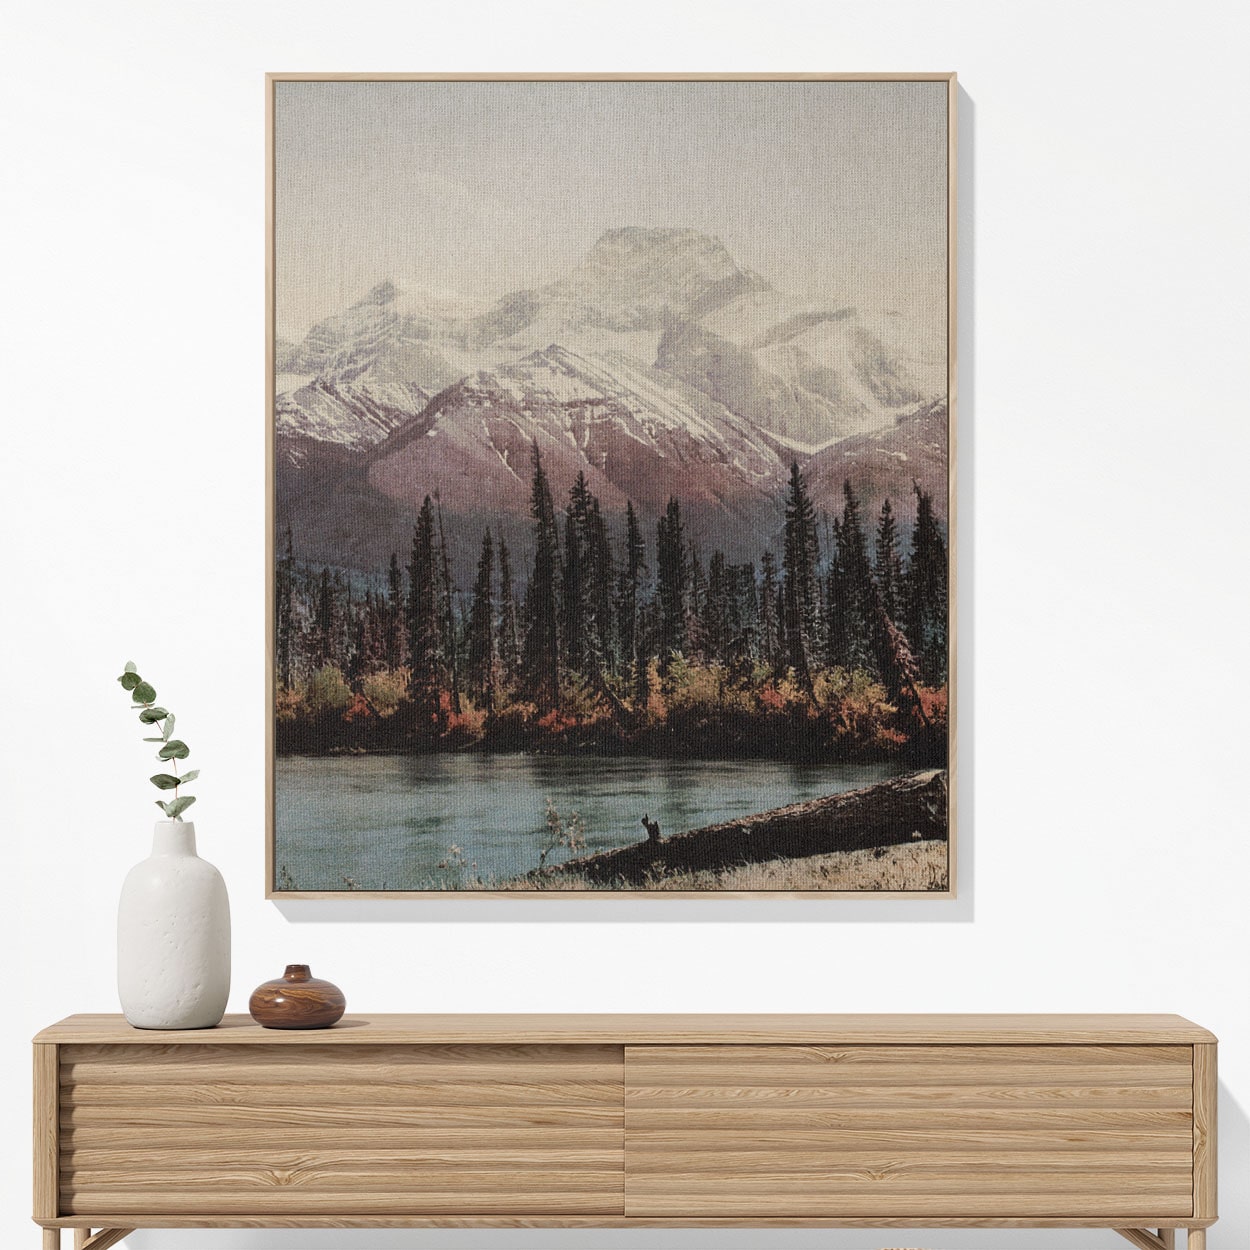 Beautiful Mountain Woven Blanket Woven Blanket Hanging on a Wall as Framed Wall Art